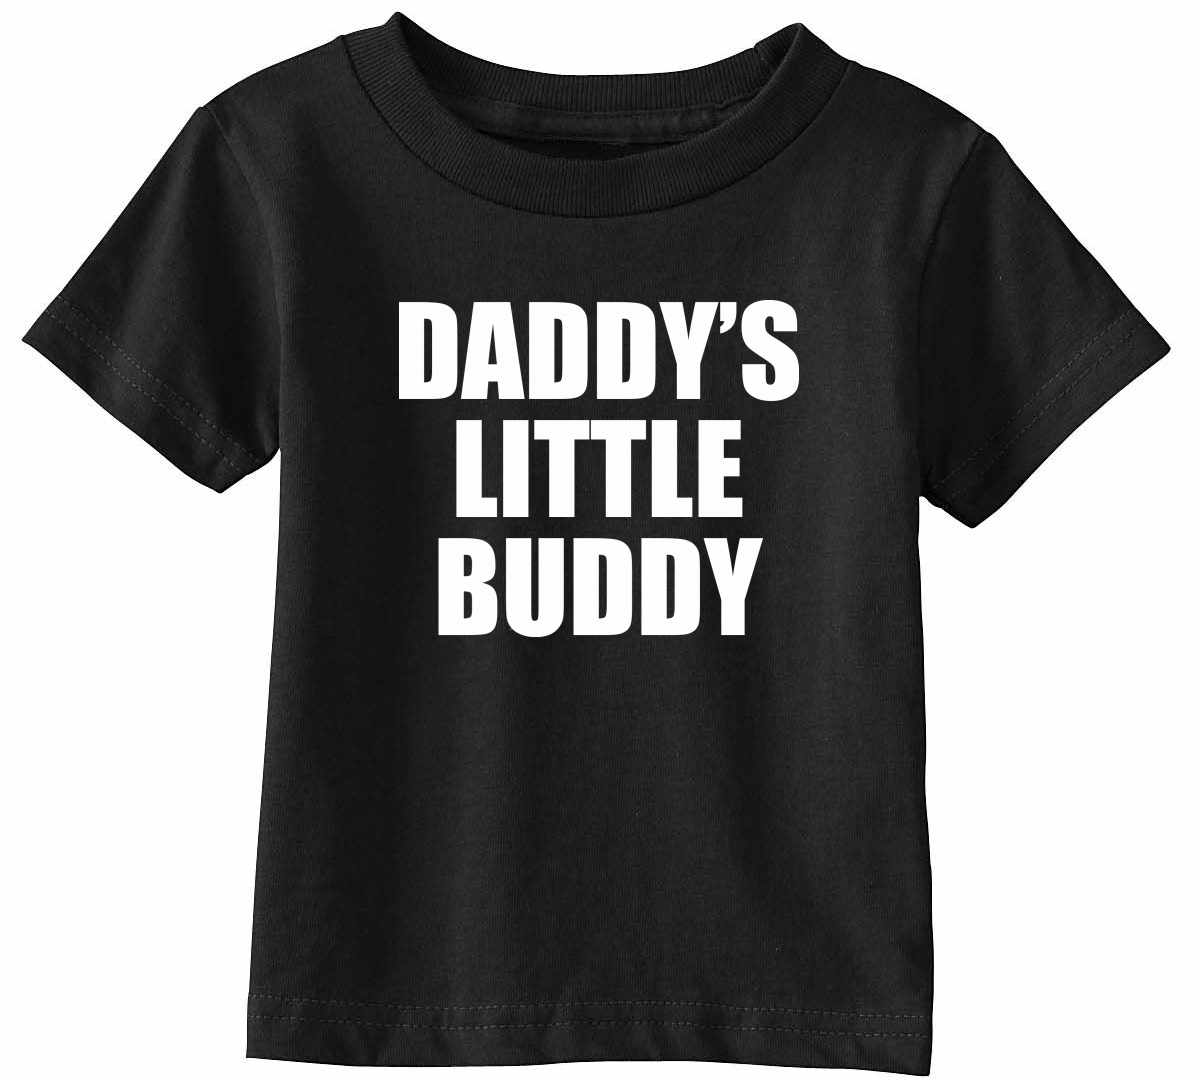 Daddy's Little Buddy on Infant-Toddler T-Shirt